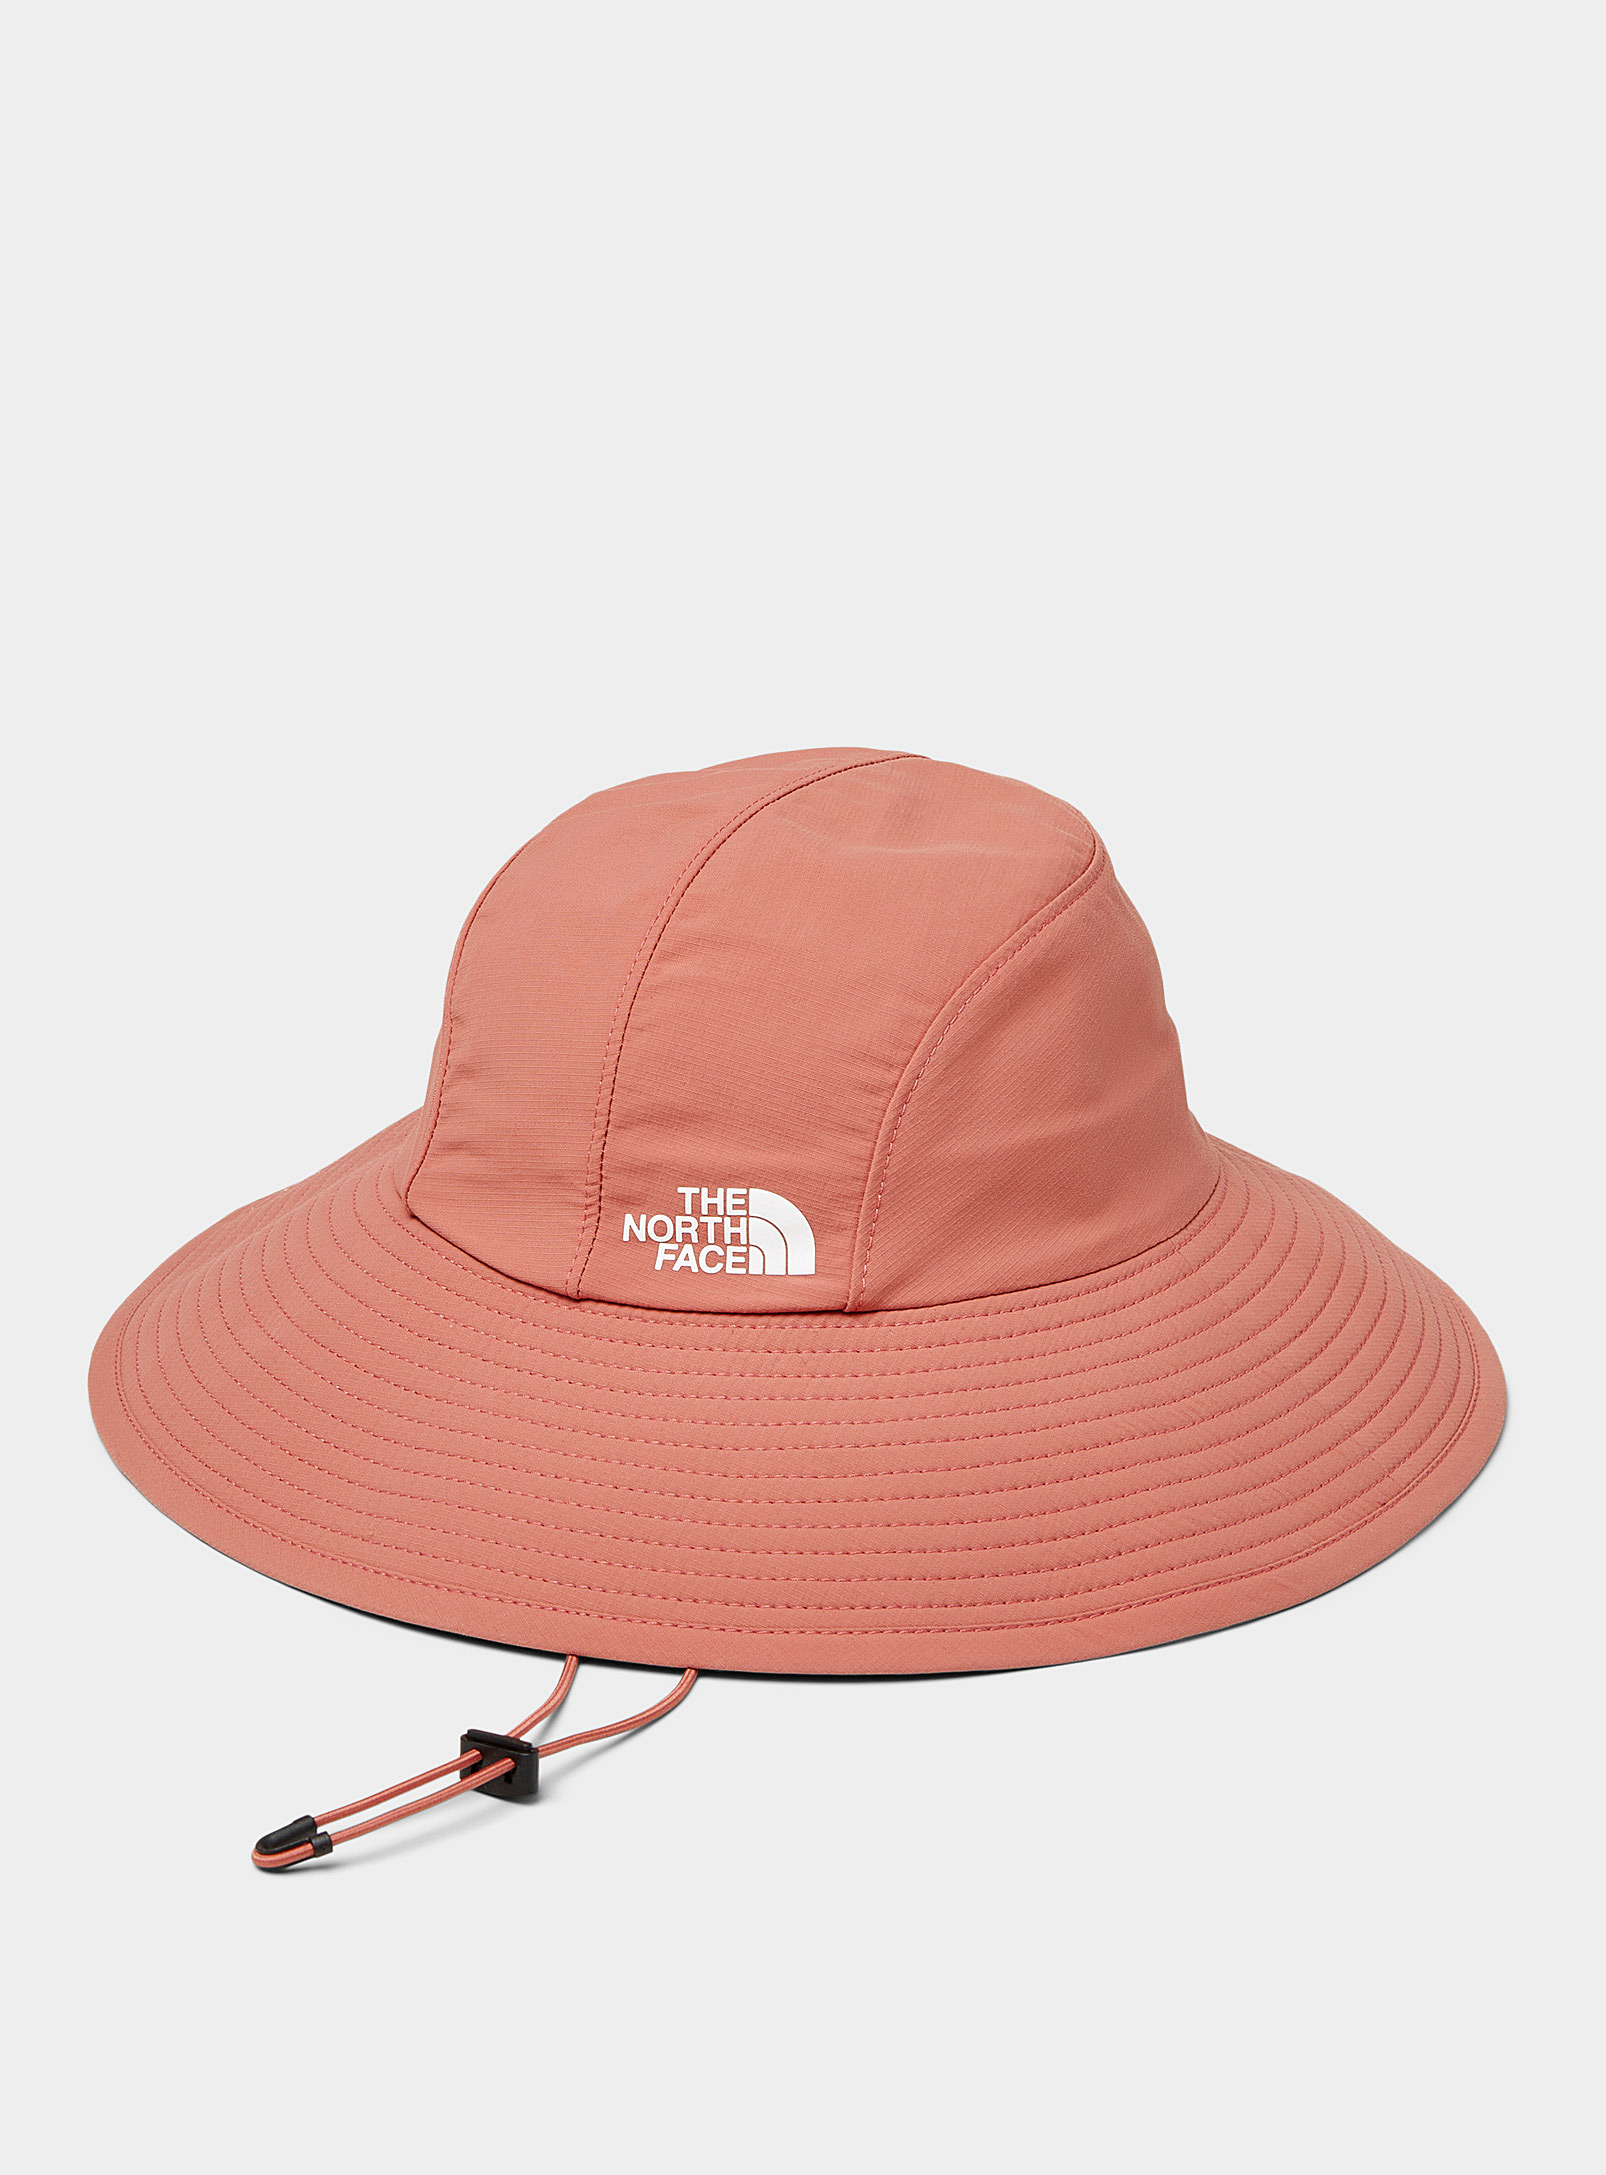 The North Face Lightweight Canvas Fisherman Hat In Pink